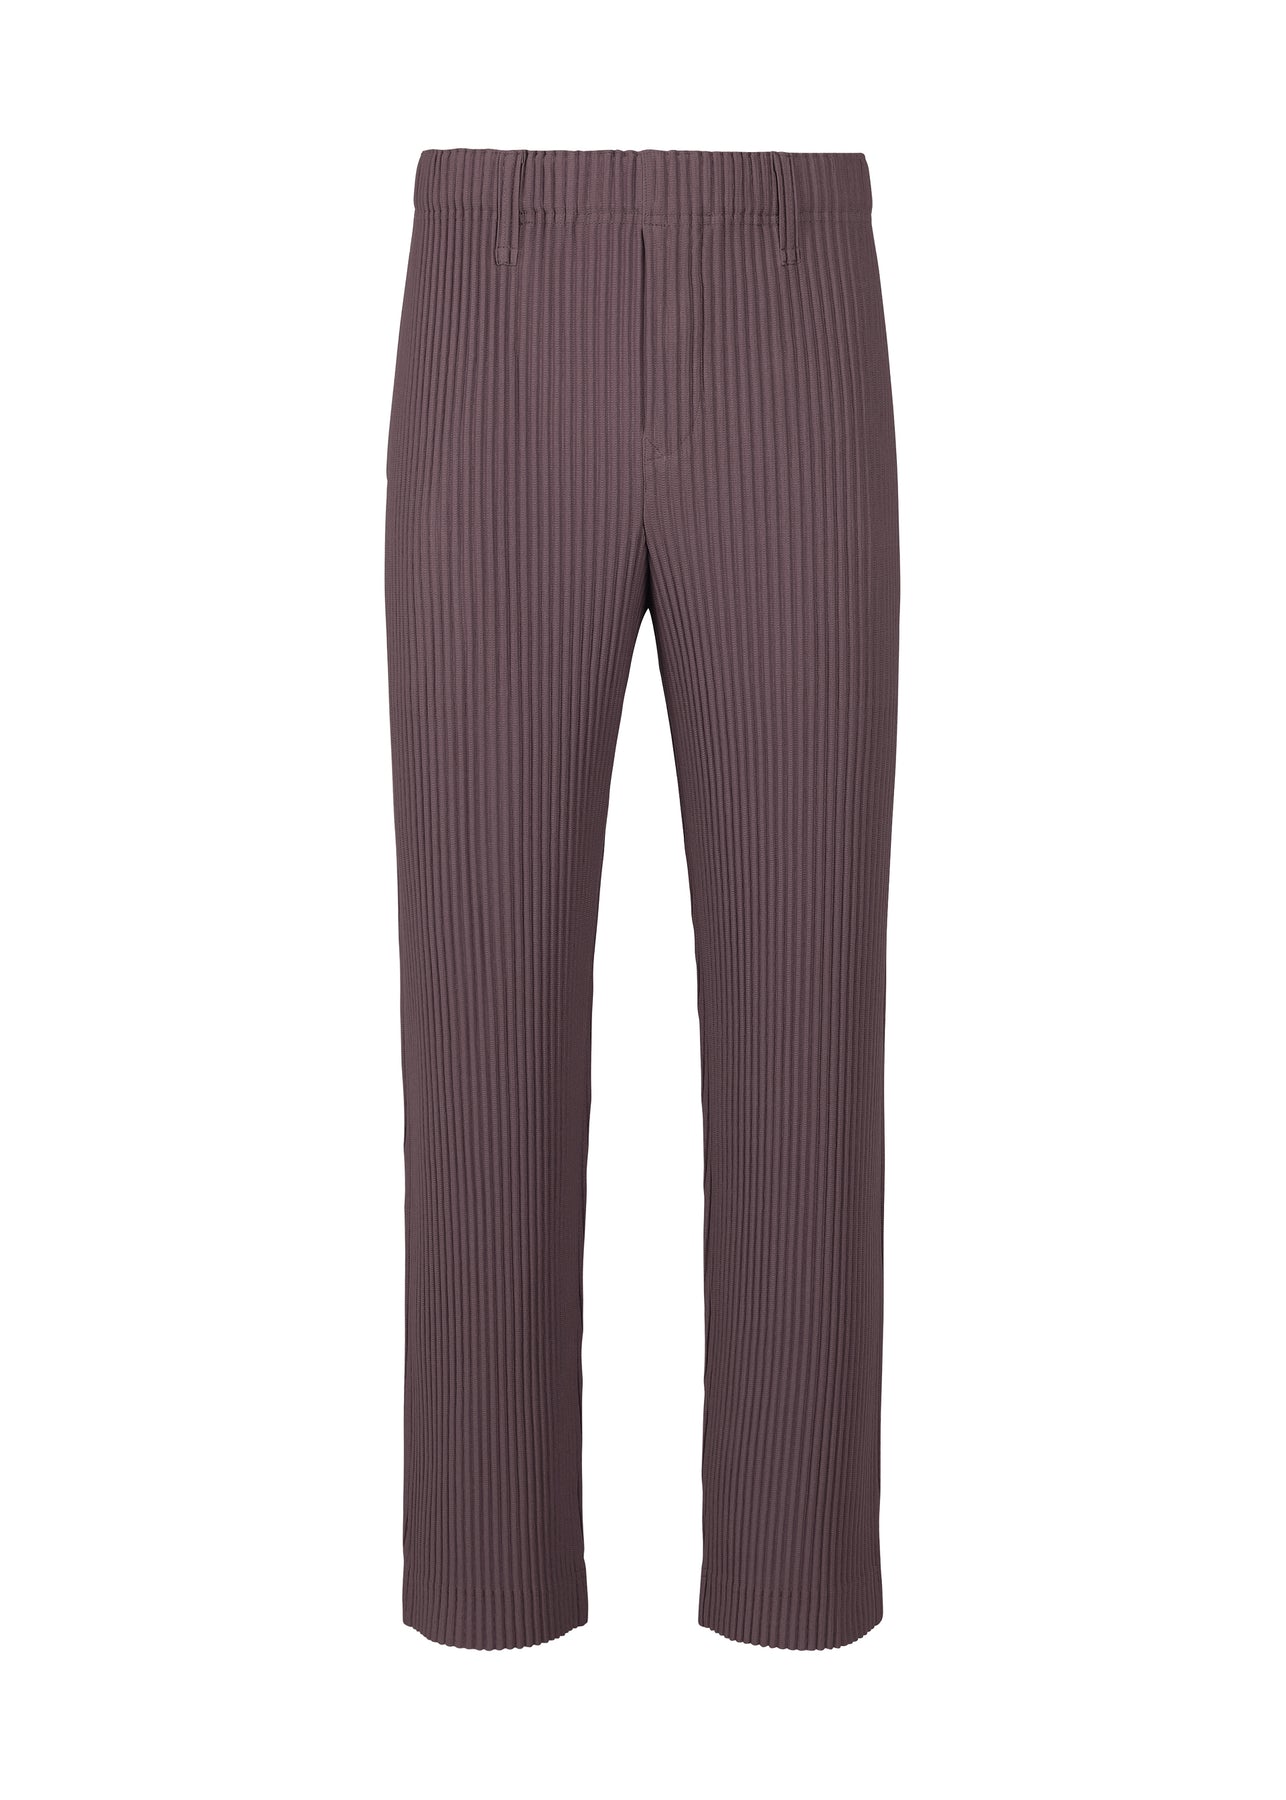 TAILORED PLEATS 2 PANTS | The official ISSEY MIYAKE ONLINE